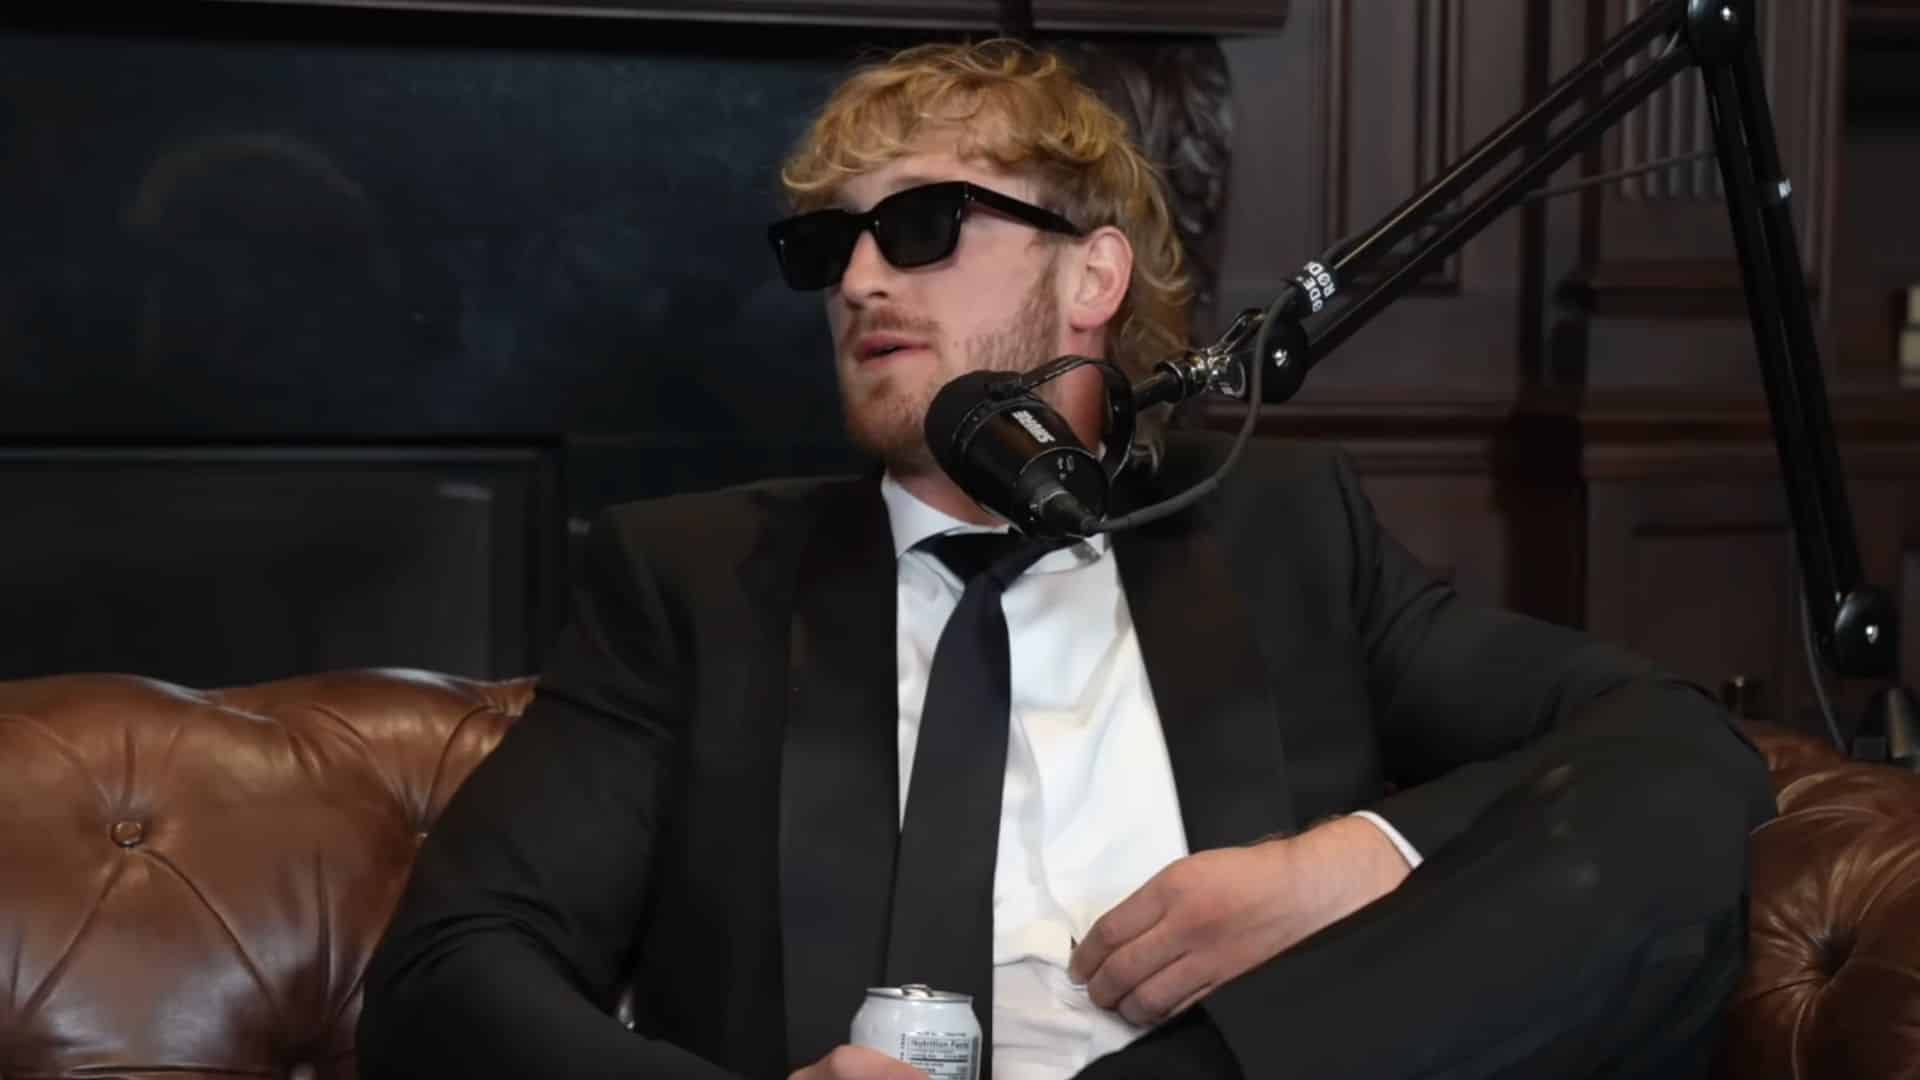 Logan Paul talking into mic wearing suit and sunglasses